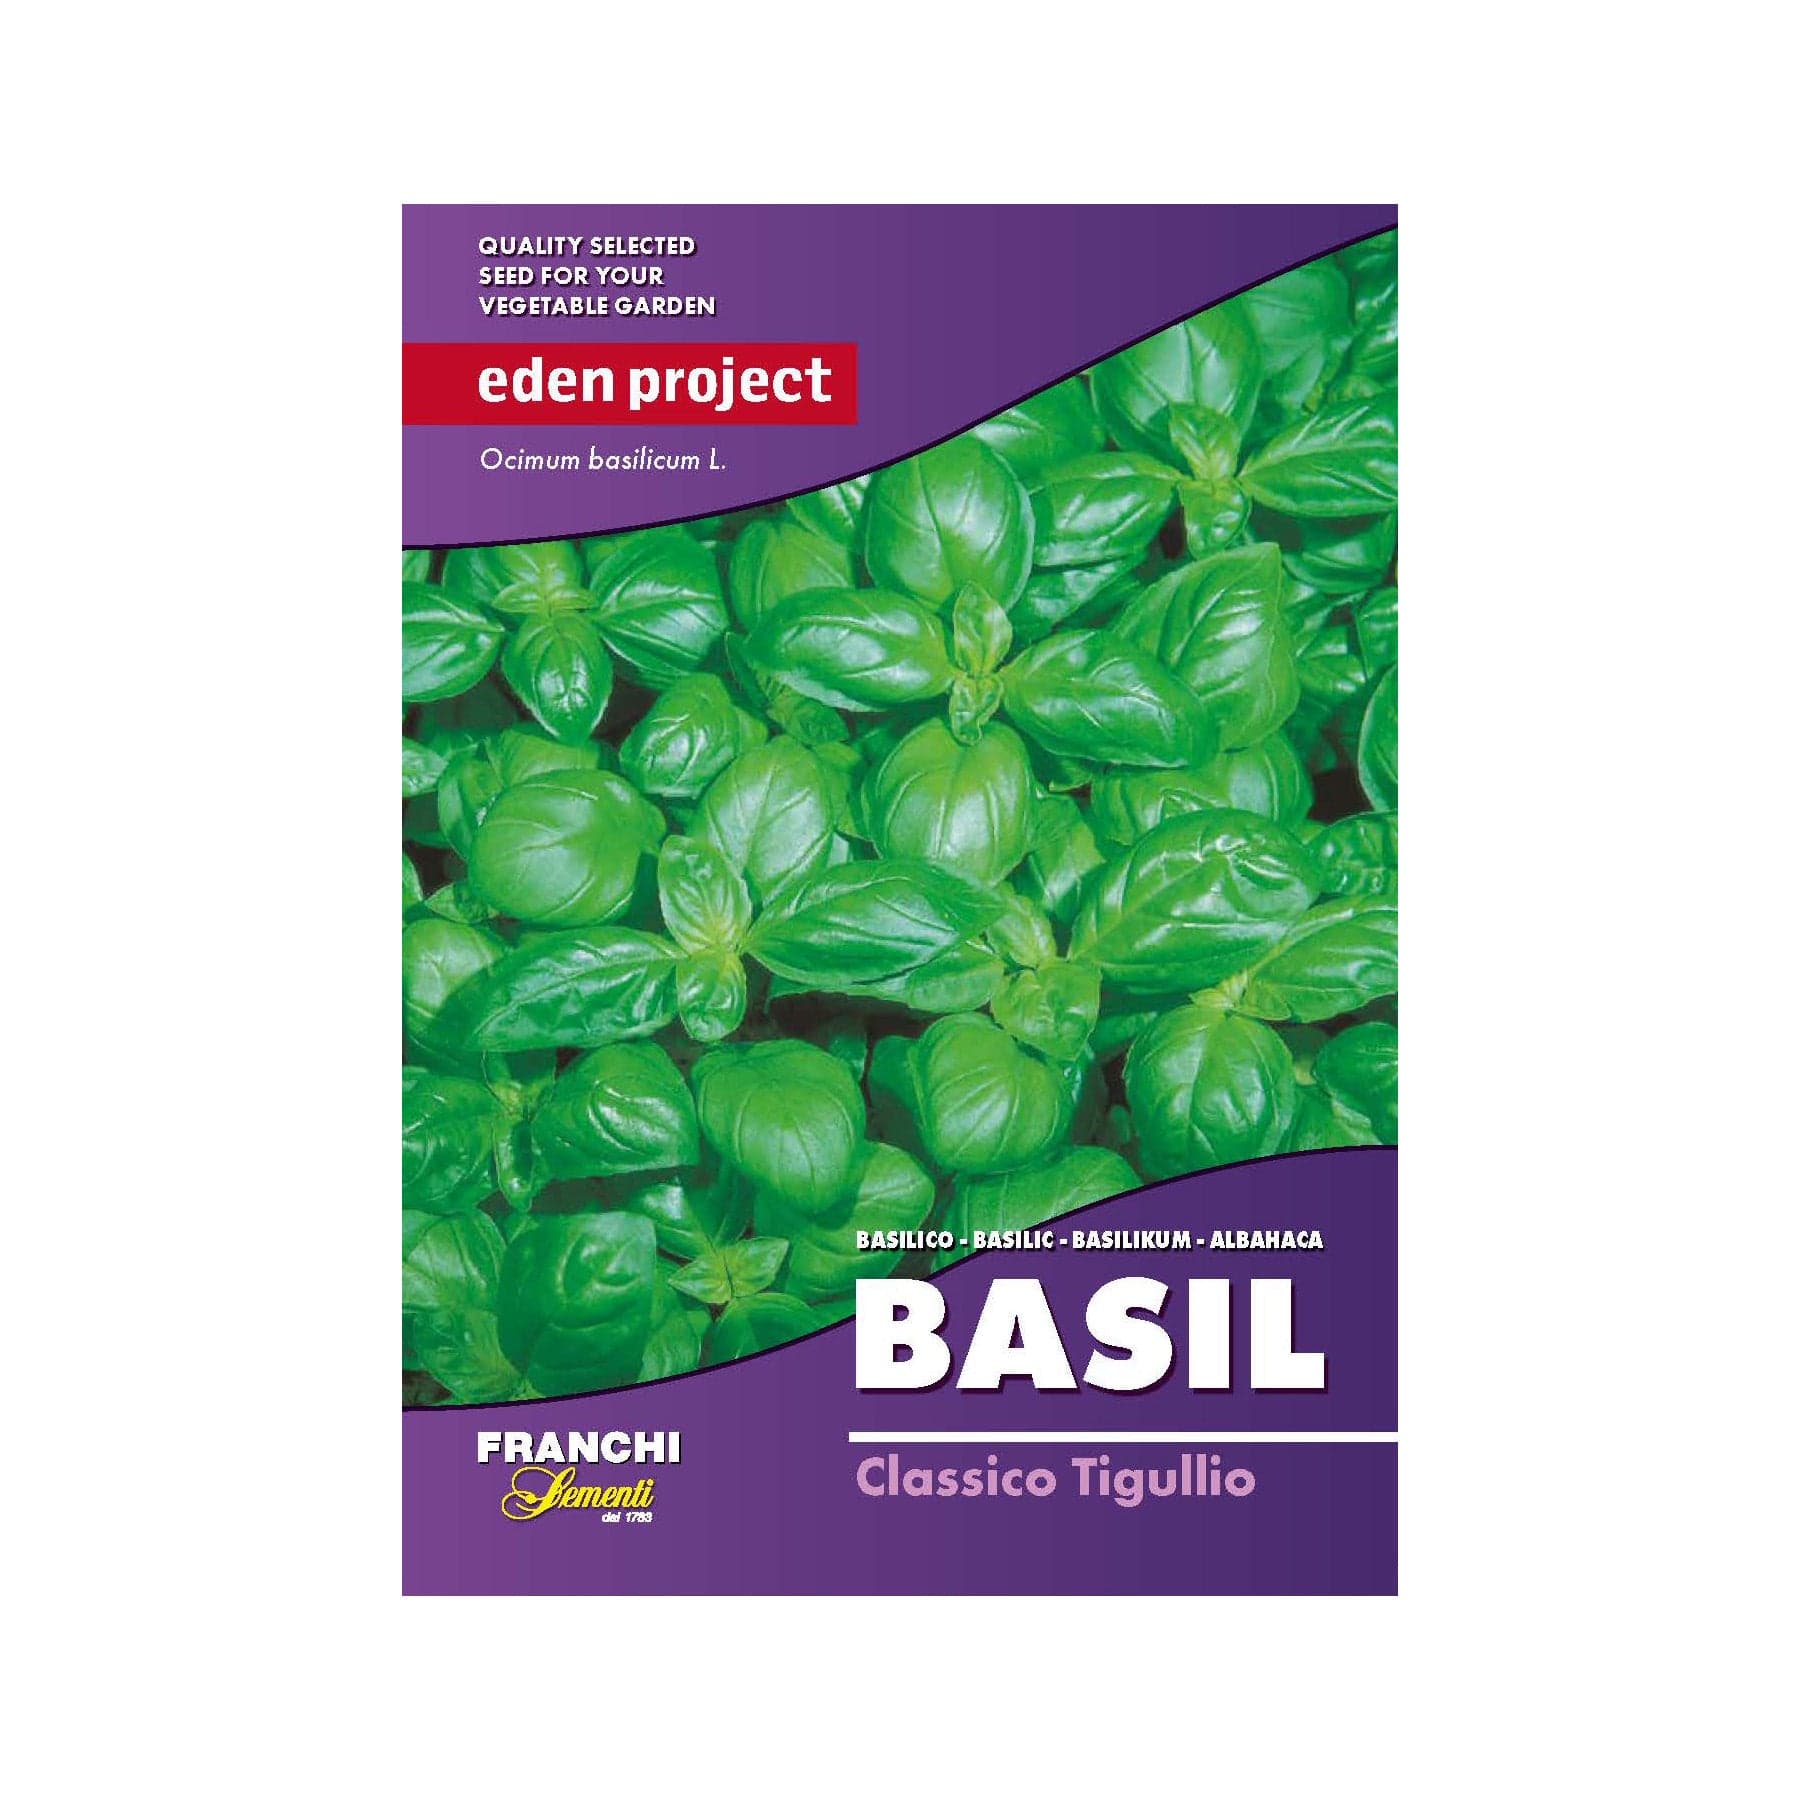 Eden Project Ocimum basilicum L. basil seed packet by Franchi Sementi, Classico Tigullio variety, with vibrant green basil leaves background.